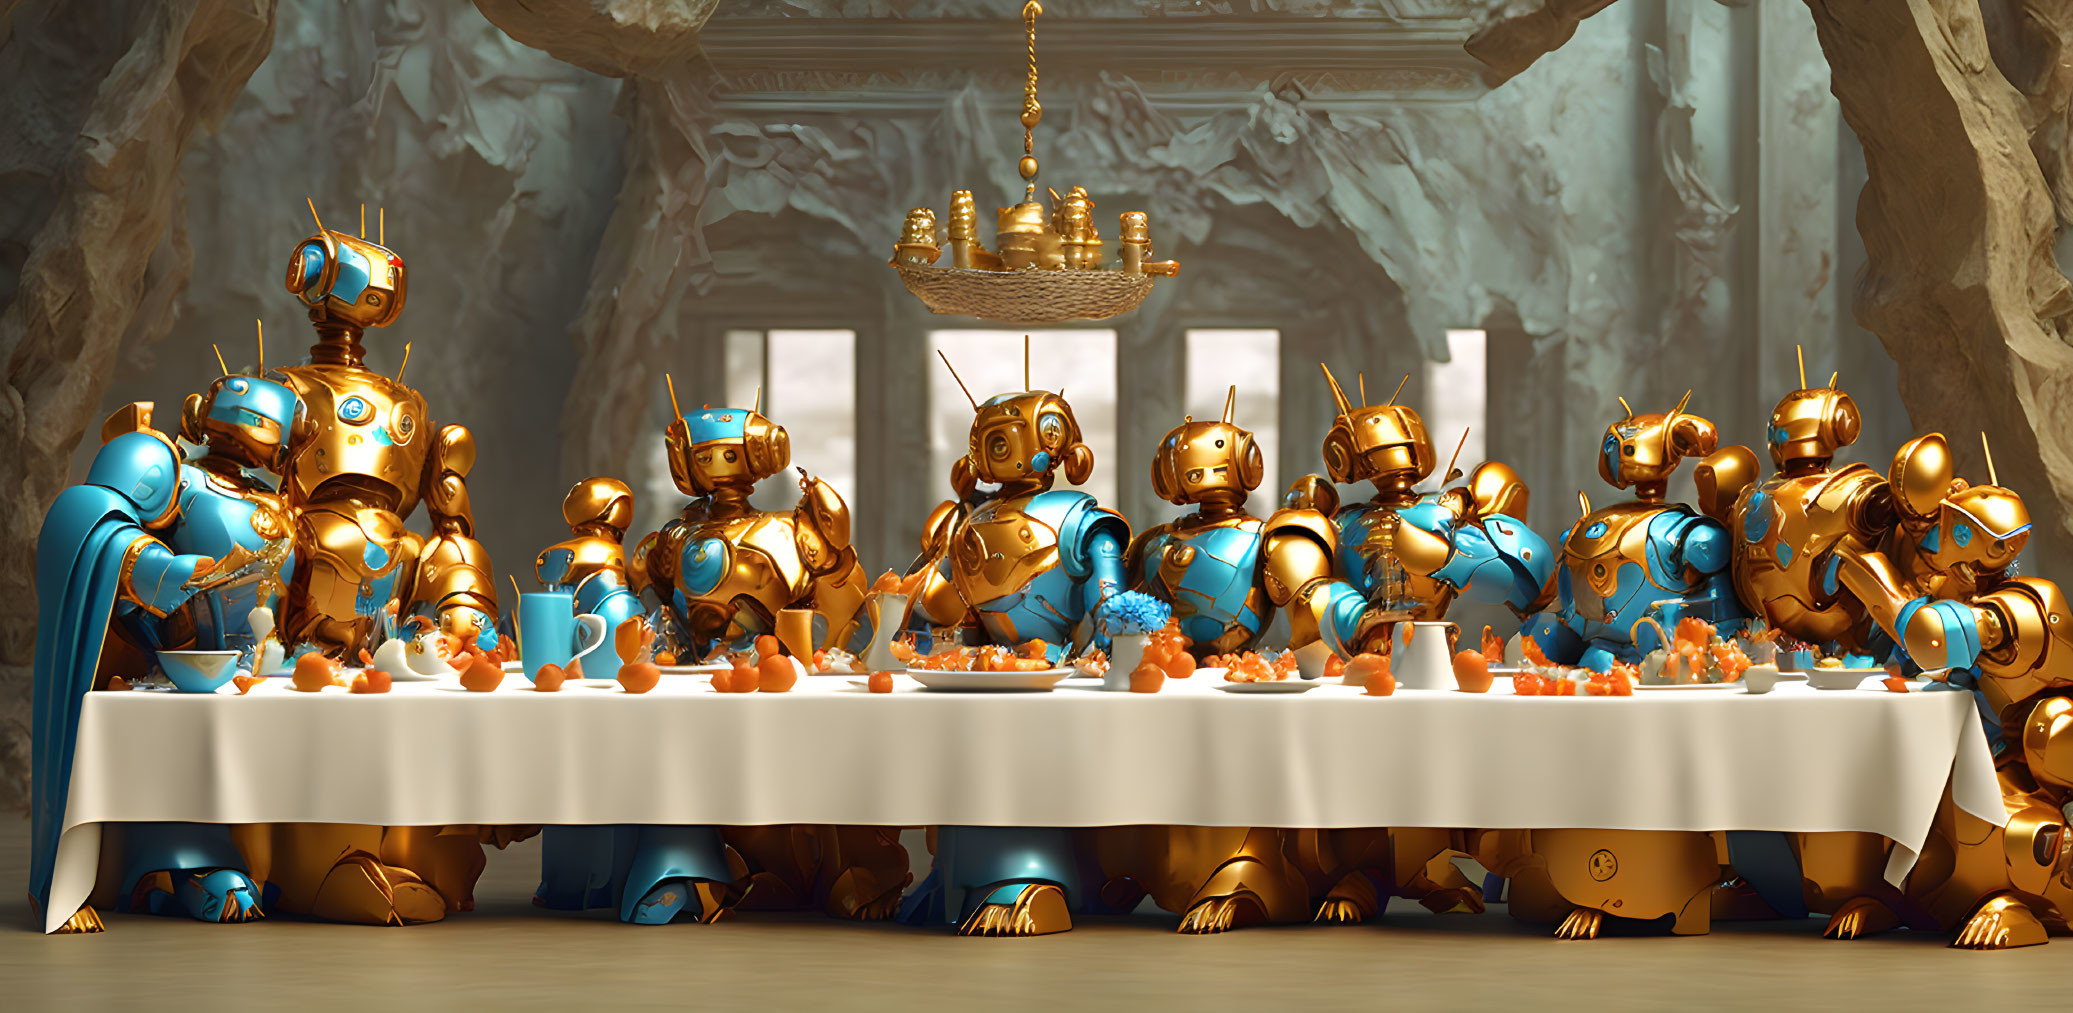 The last Robot Supper